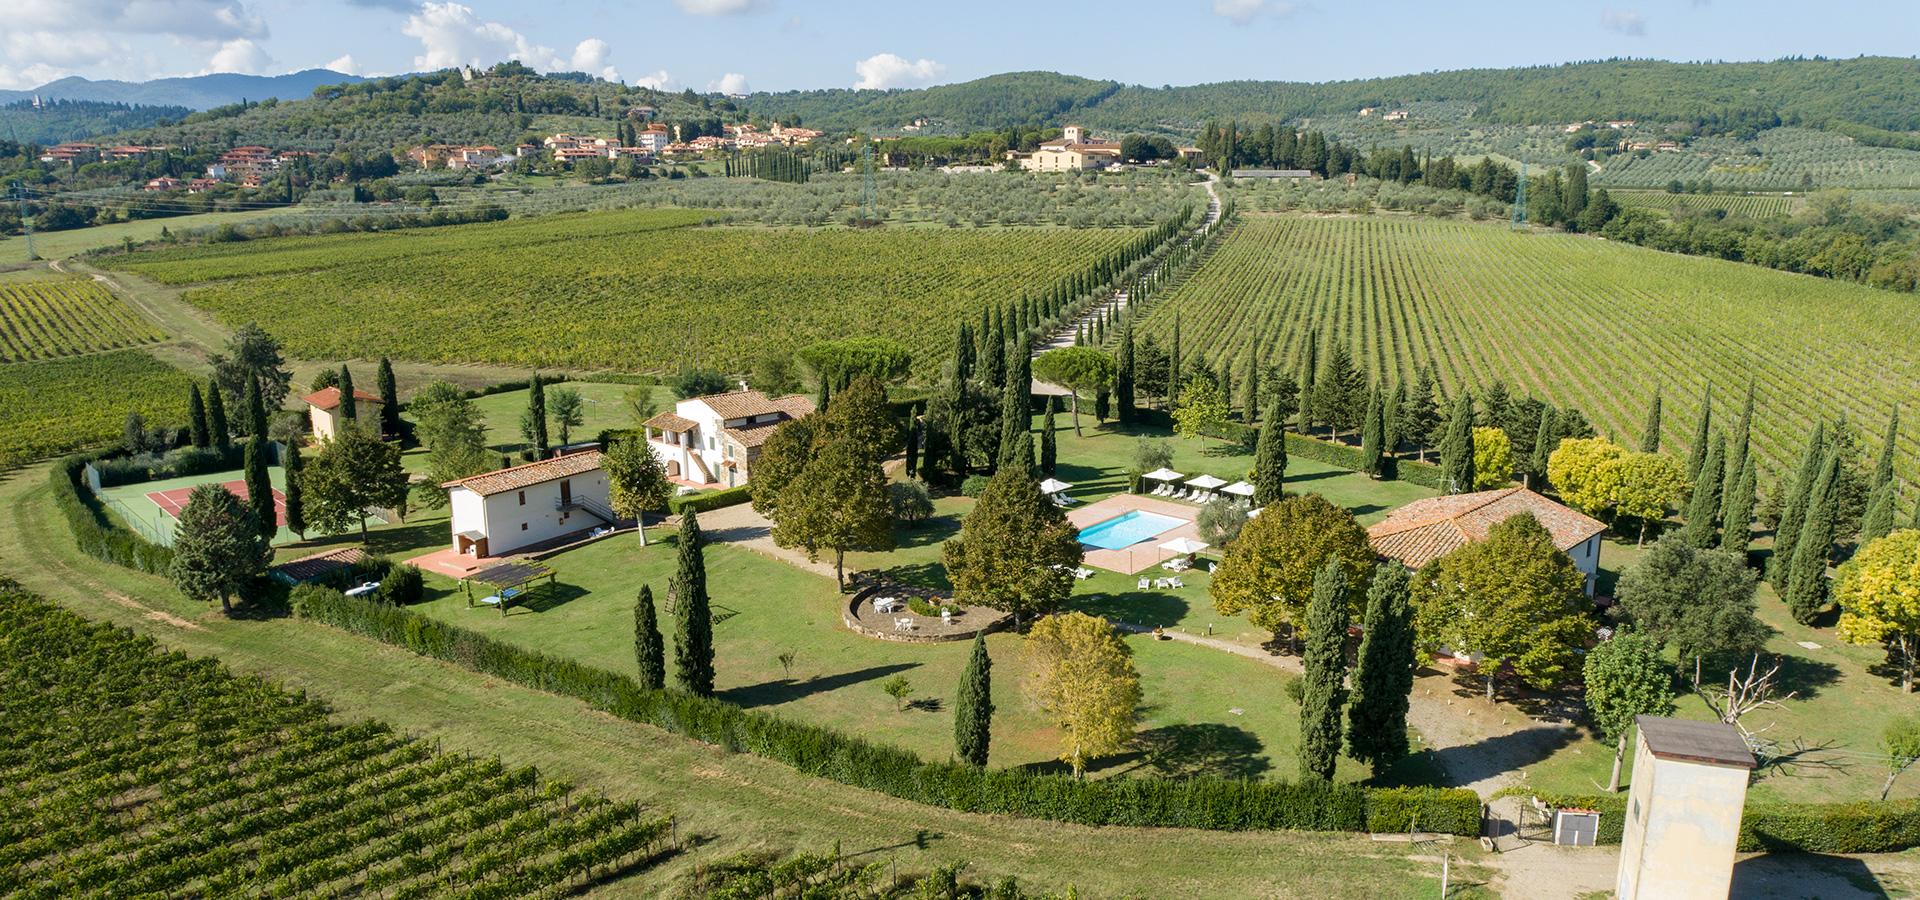 Fattoria Pagnana | Agritourism in Chianti a few kilometres from Florence